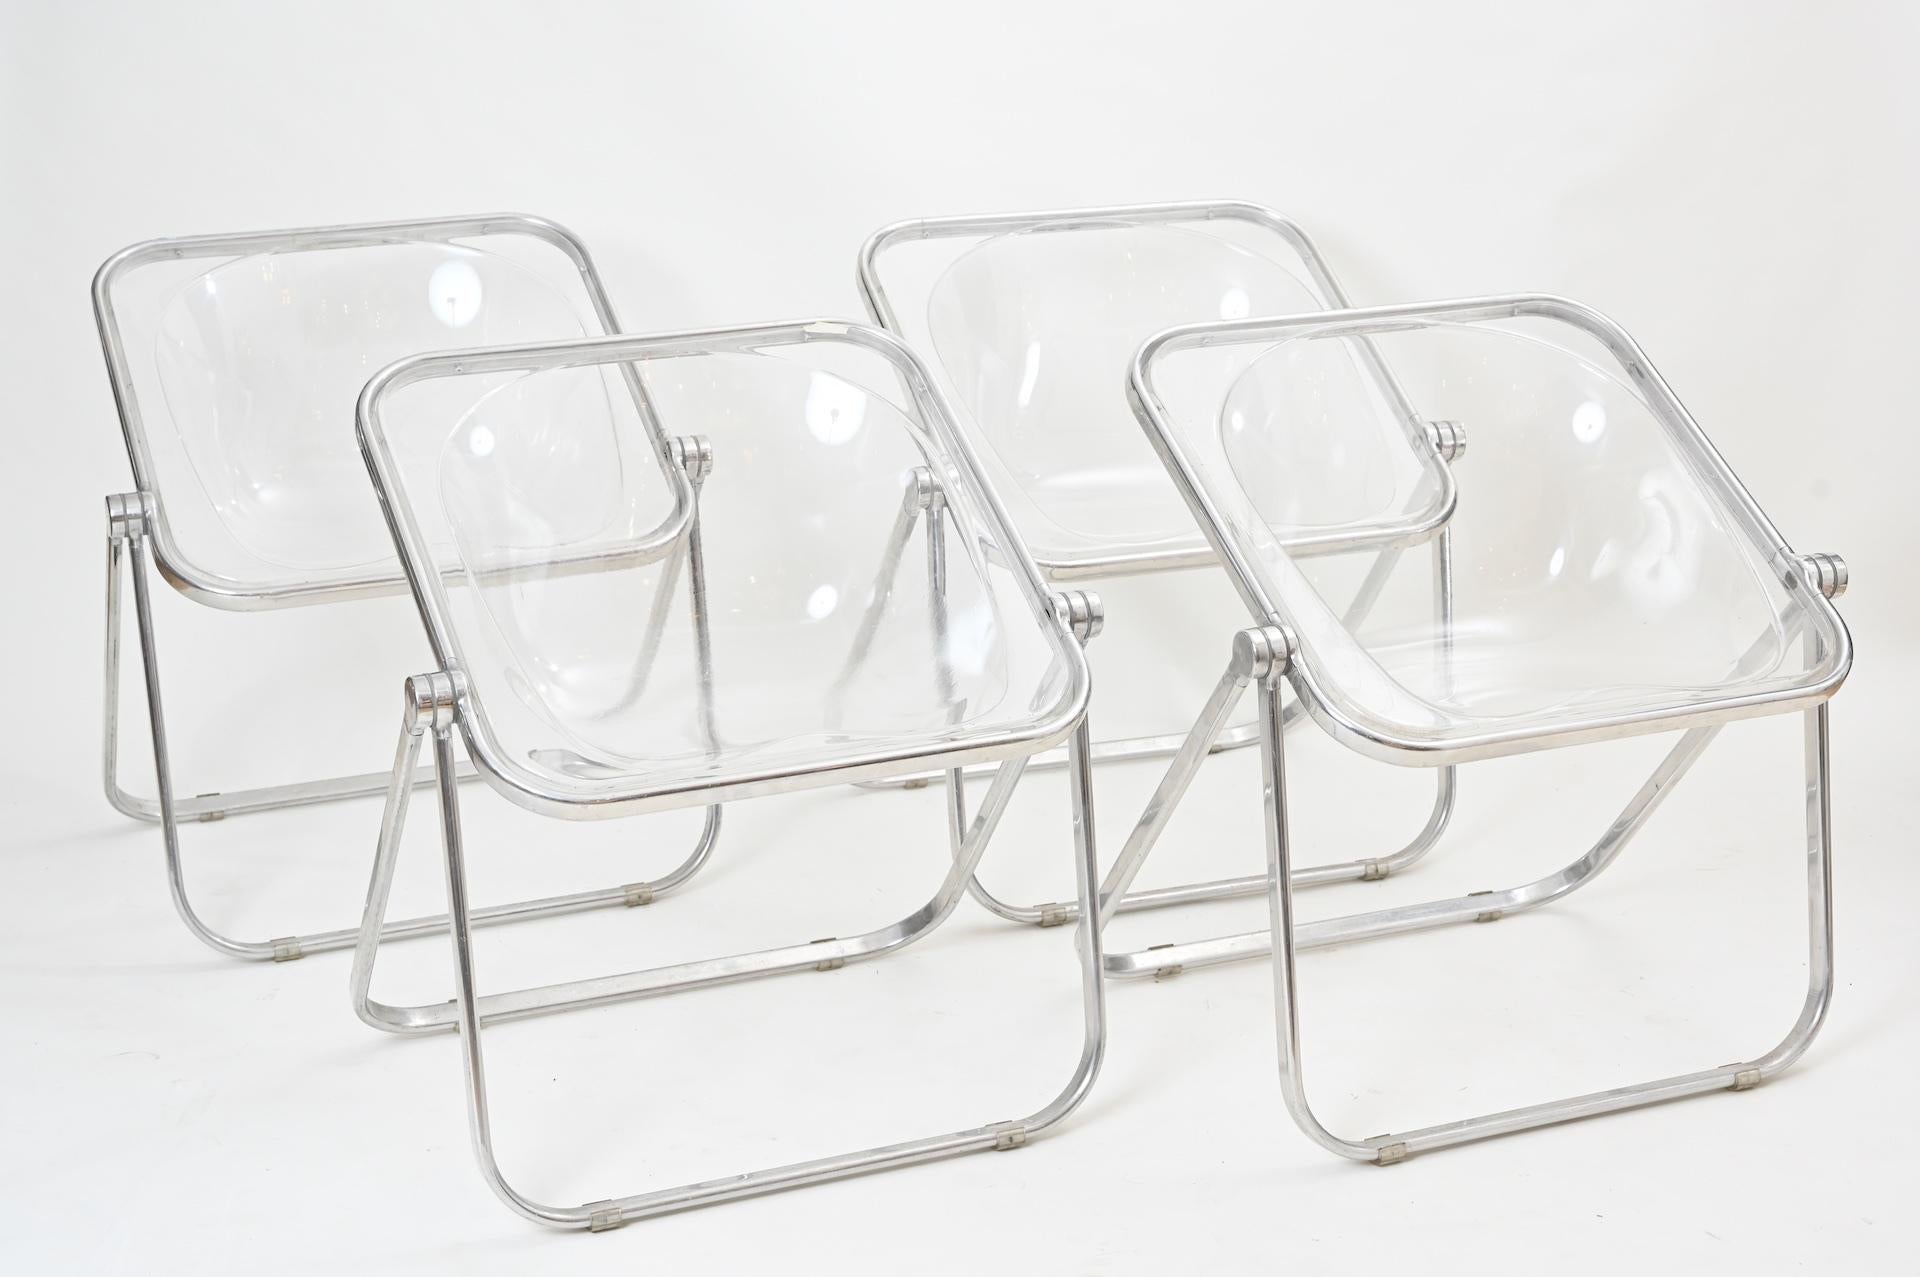 The hard to find translucent Plona chairs... four available. In very good condition

The lounge version of the folding chairs by Giancarlo Piretti.